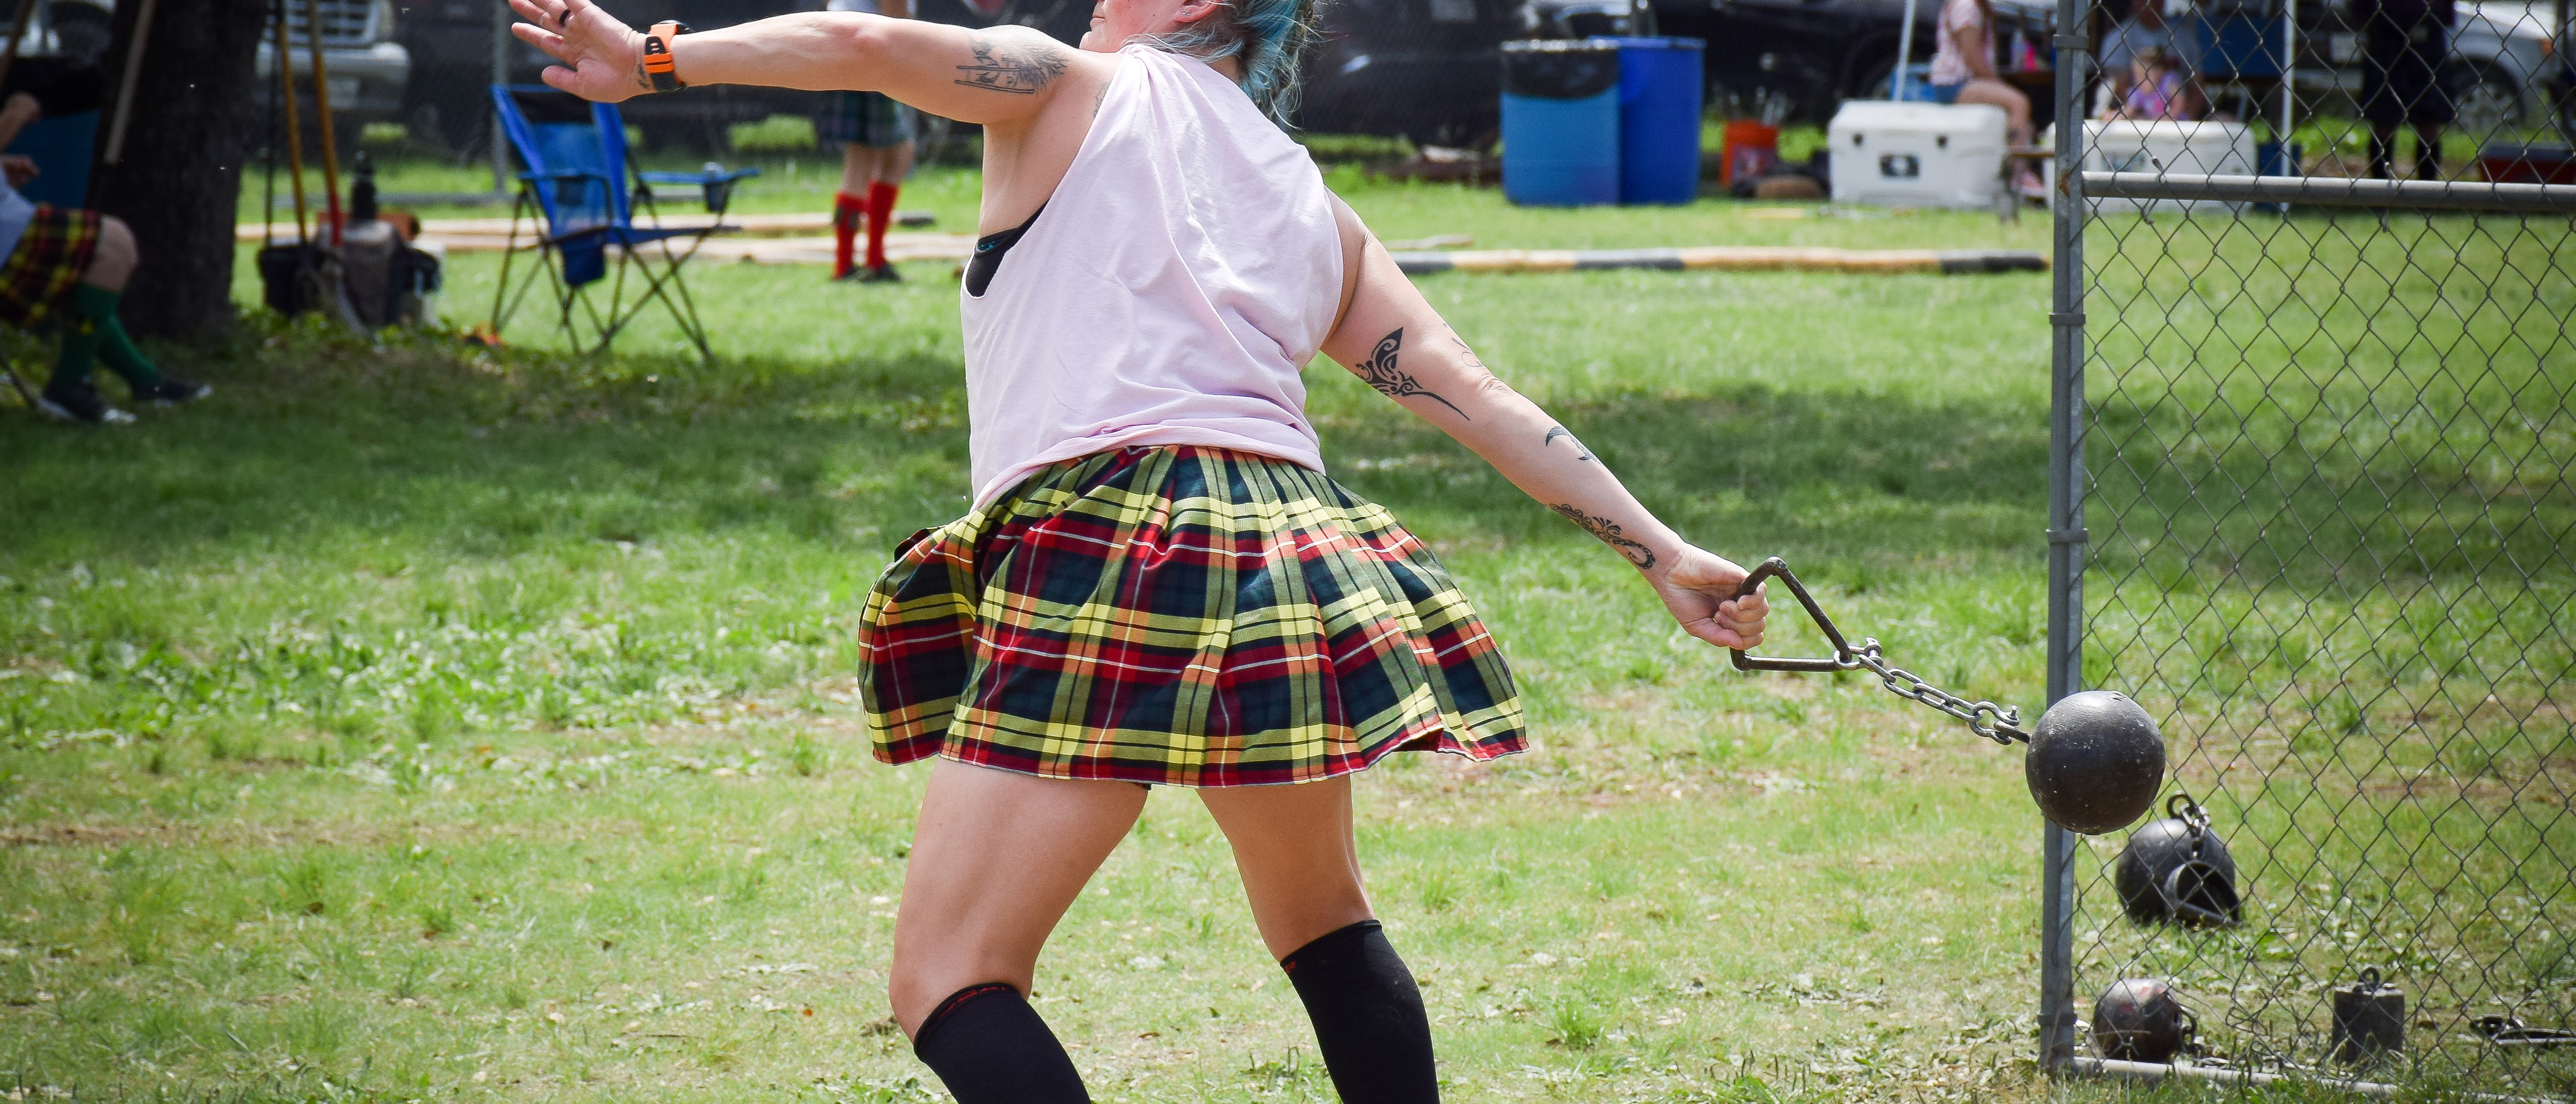 Busty Celtica fans!, at the San Antonio Highland Games